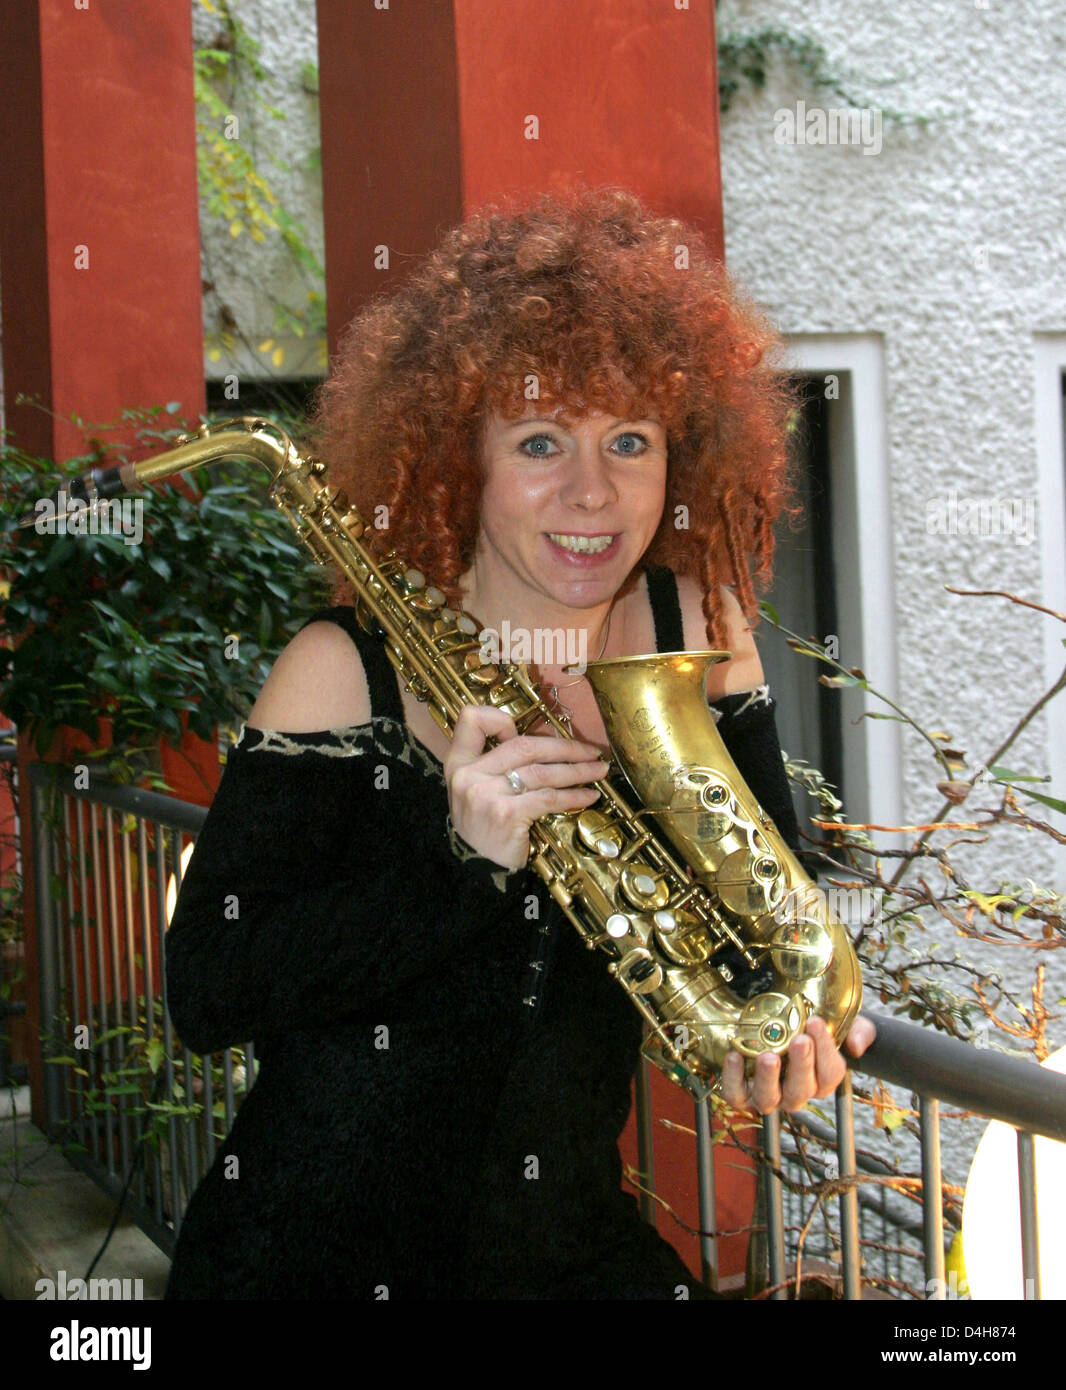 Saxophon player Tina Tandler poses during a press conference at restaurant Guy in Berlin, Germany, 05 November 2008. The upcoming jazz festival, to take place at the Palais of Berlin?s Radio Tower (Funkturm) on 29 November, was introduced during the conference. Photo: Xamax Stock Photo